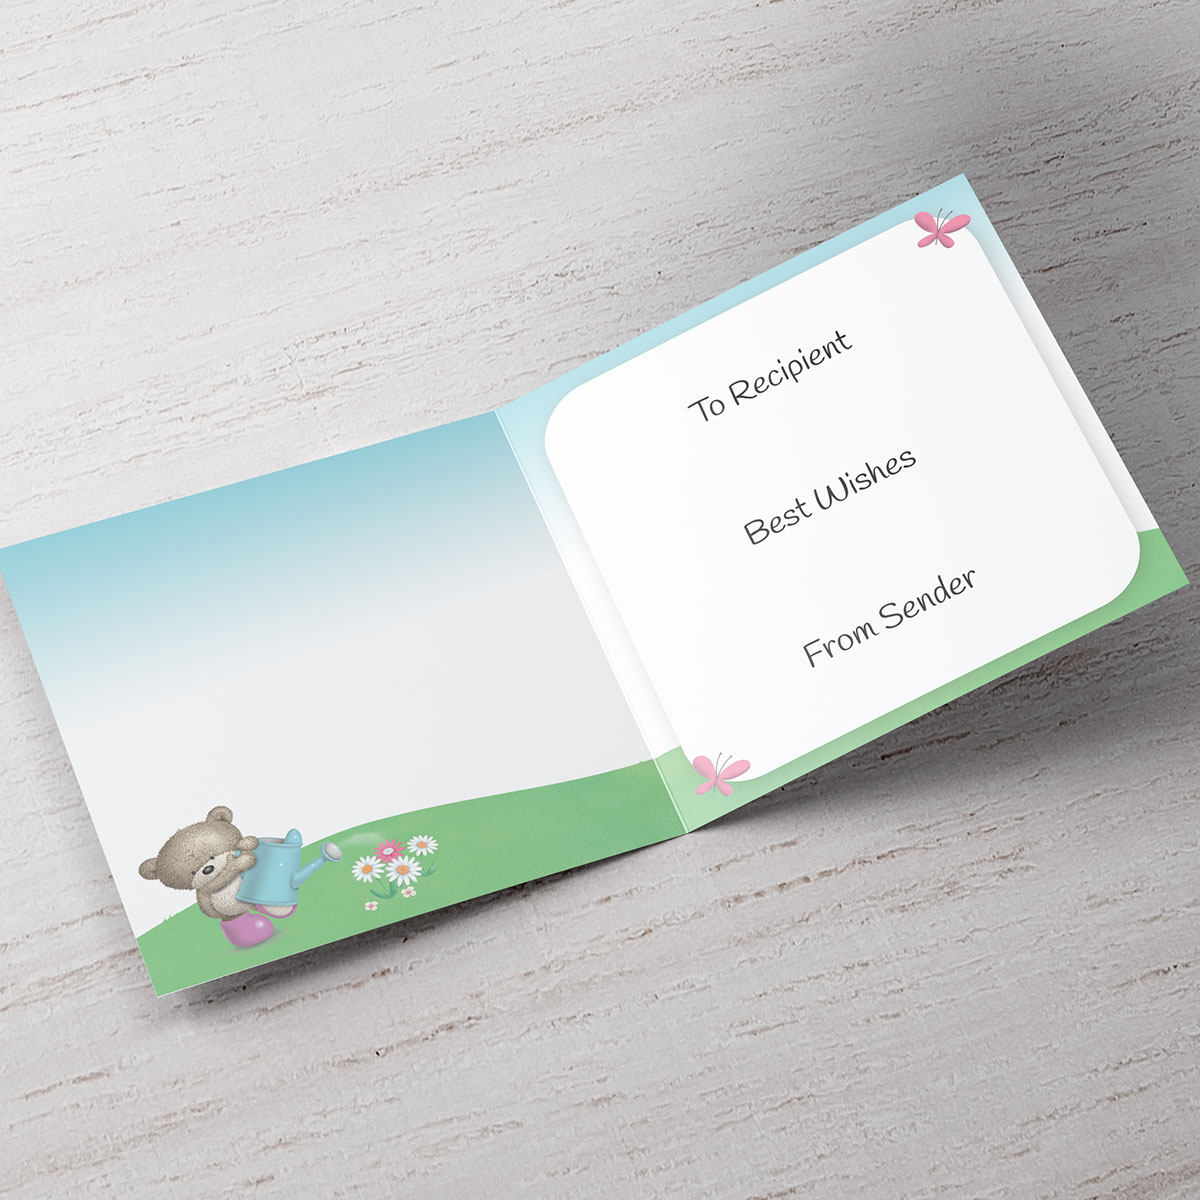 Personalised Hugs Mother's Day Charity Card - Garden Bear